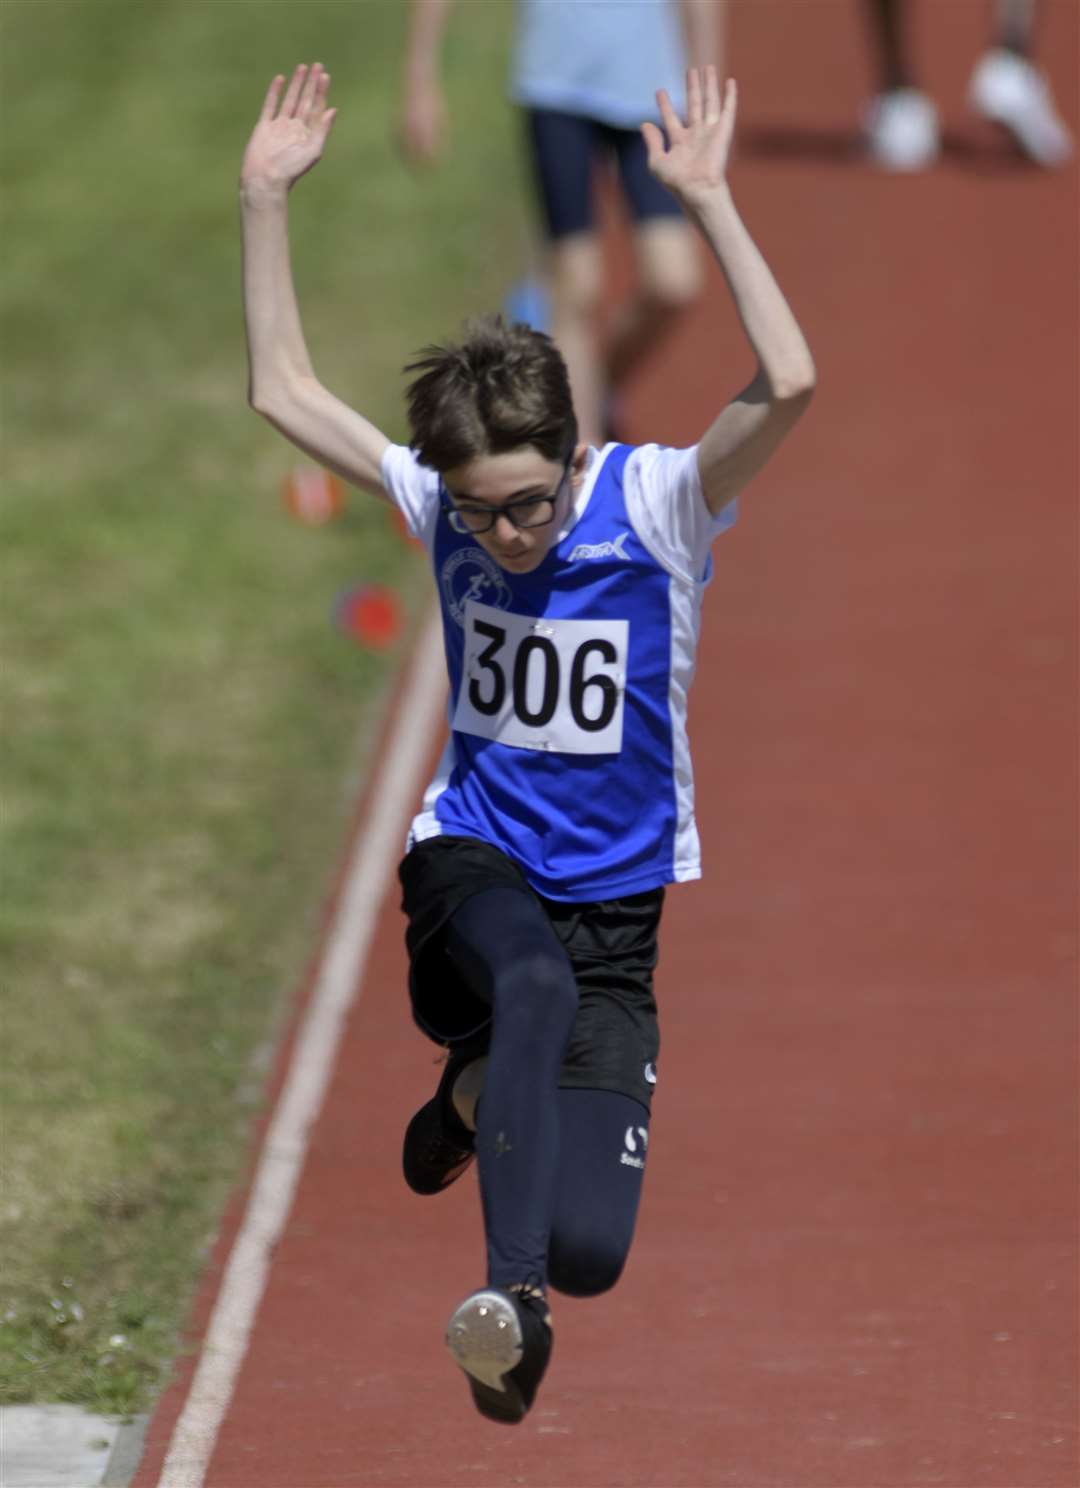 Alfie Hughes of Swale Combined AC.leaps into long jump action in the under-15 boys' category. Picture: Barry Goodwin (56693759)